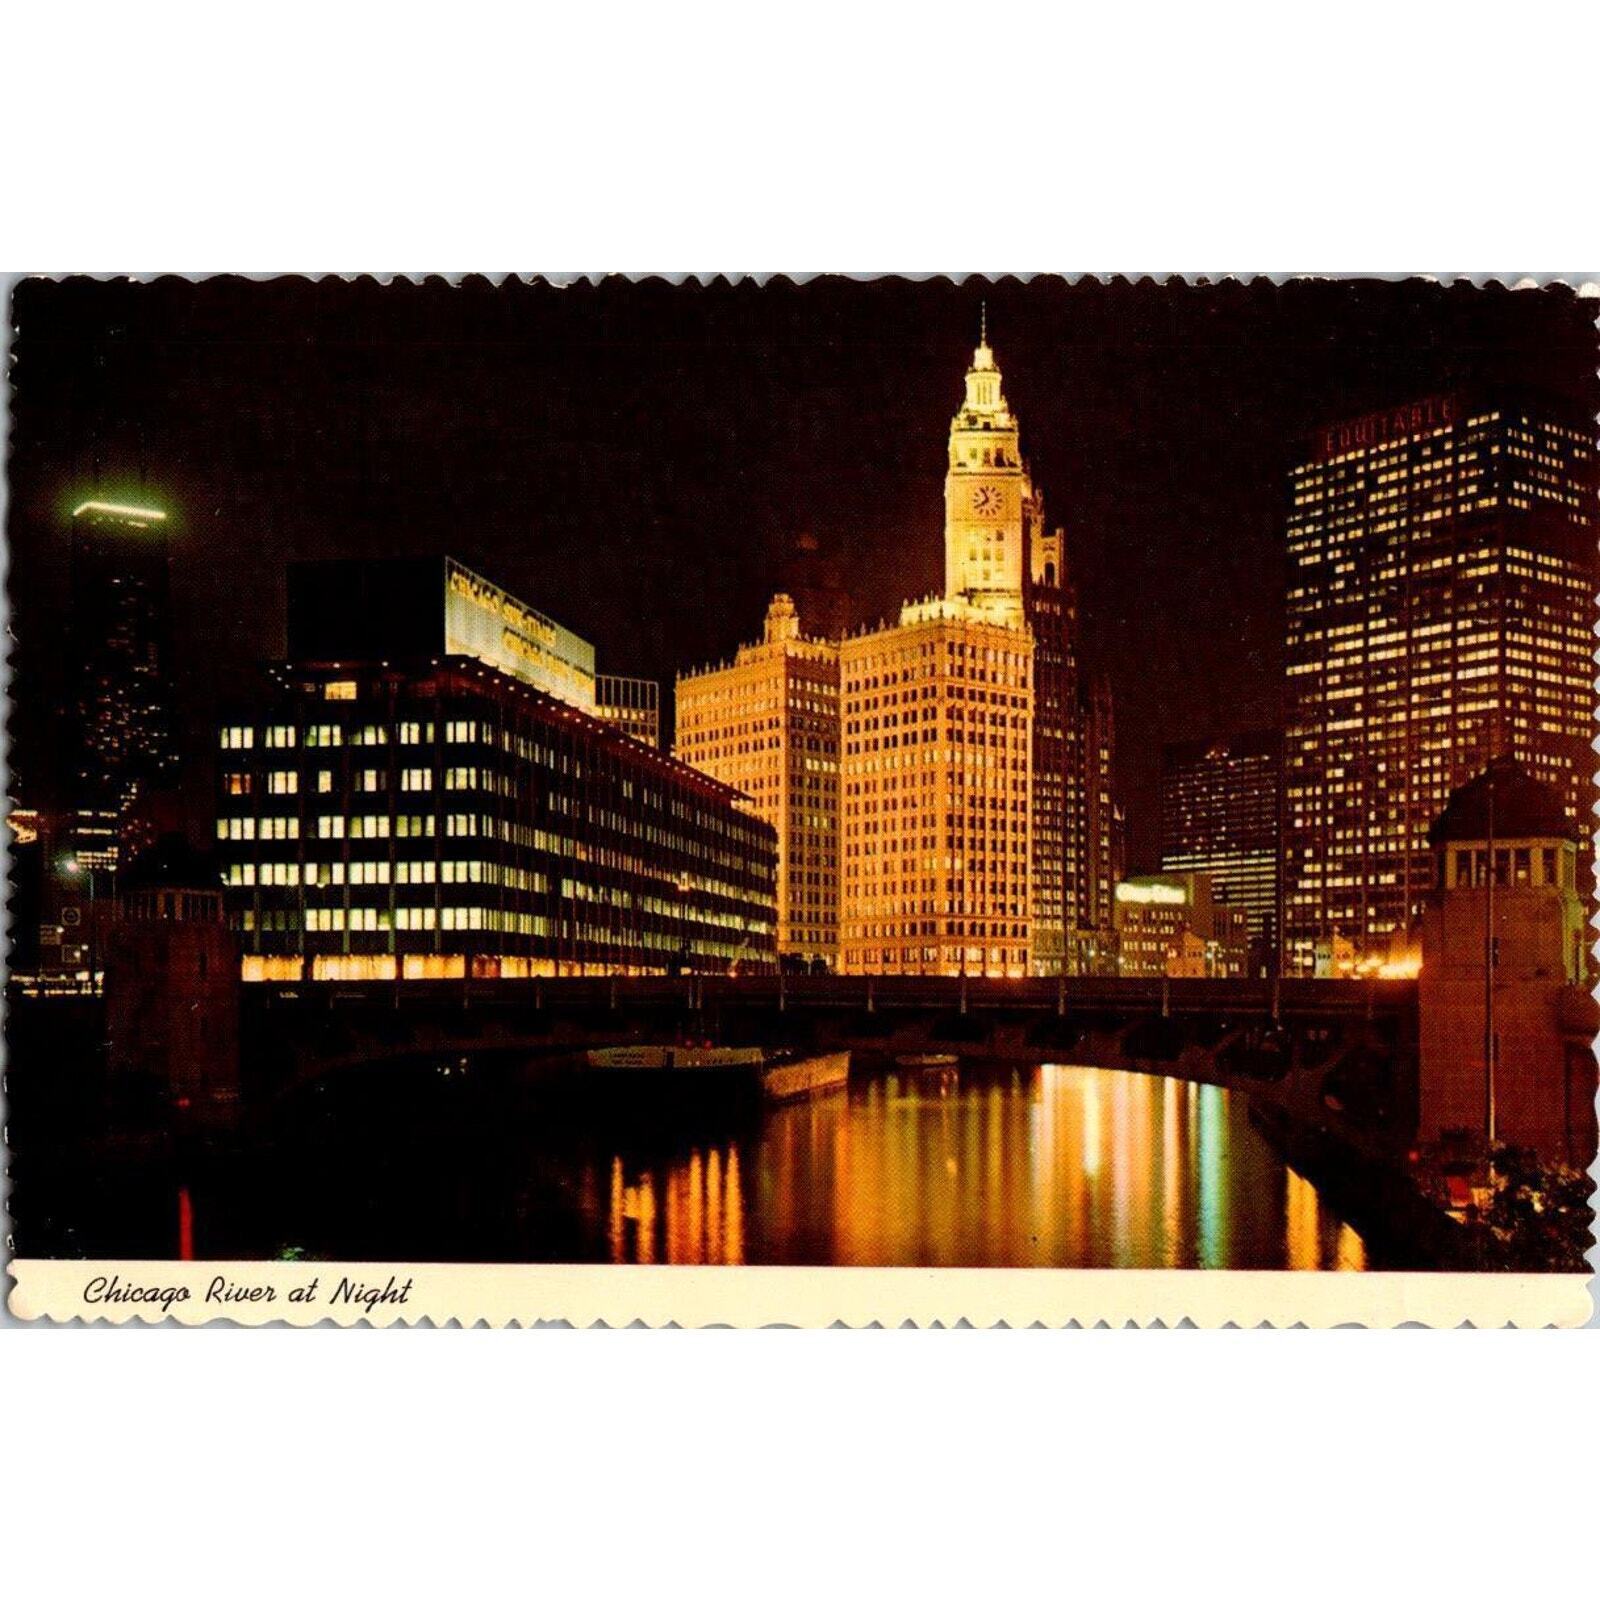 Vintage Postcard Chicago Illinois River at Night, Sun Times Daily News Building